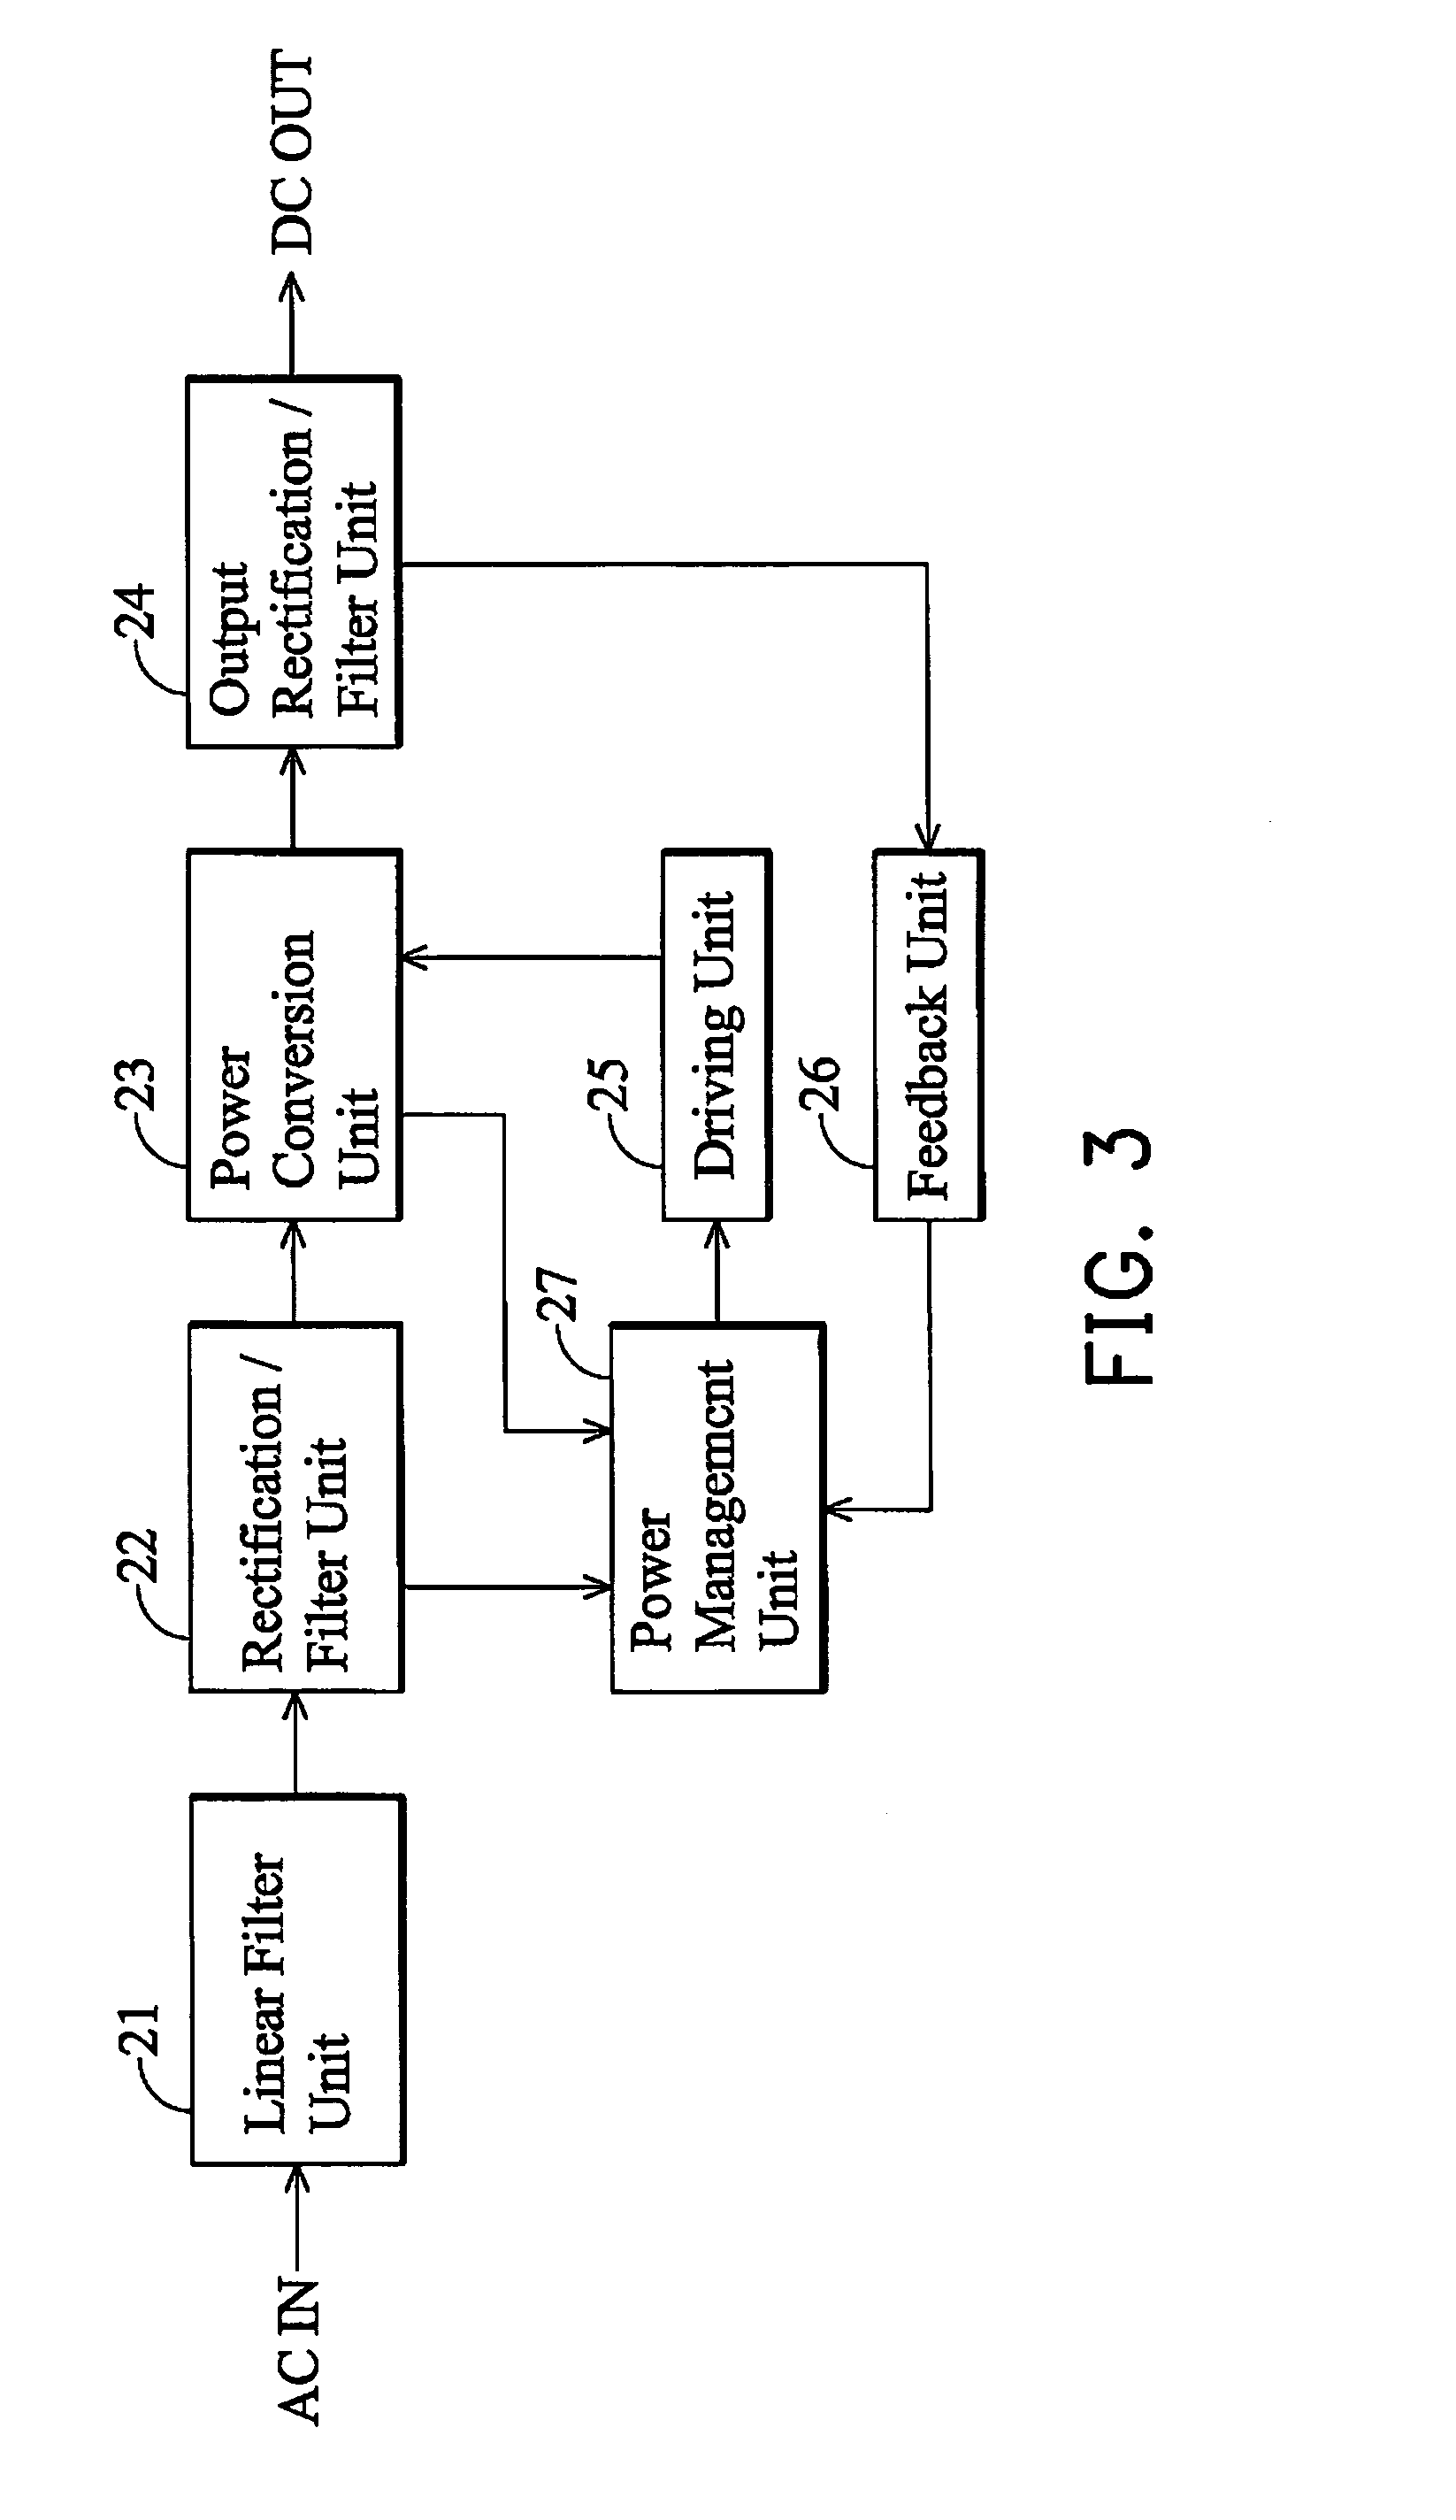 LCD with power conversion capability